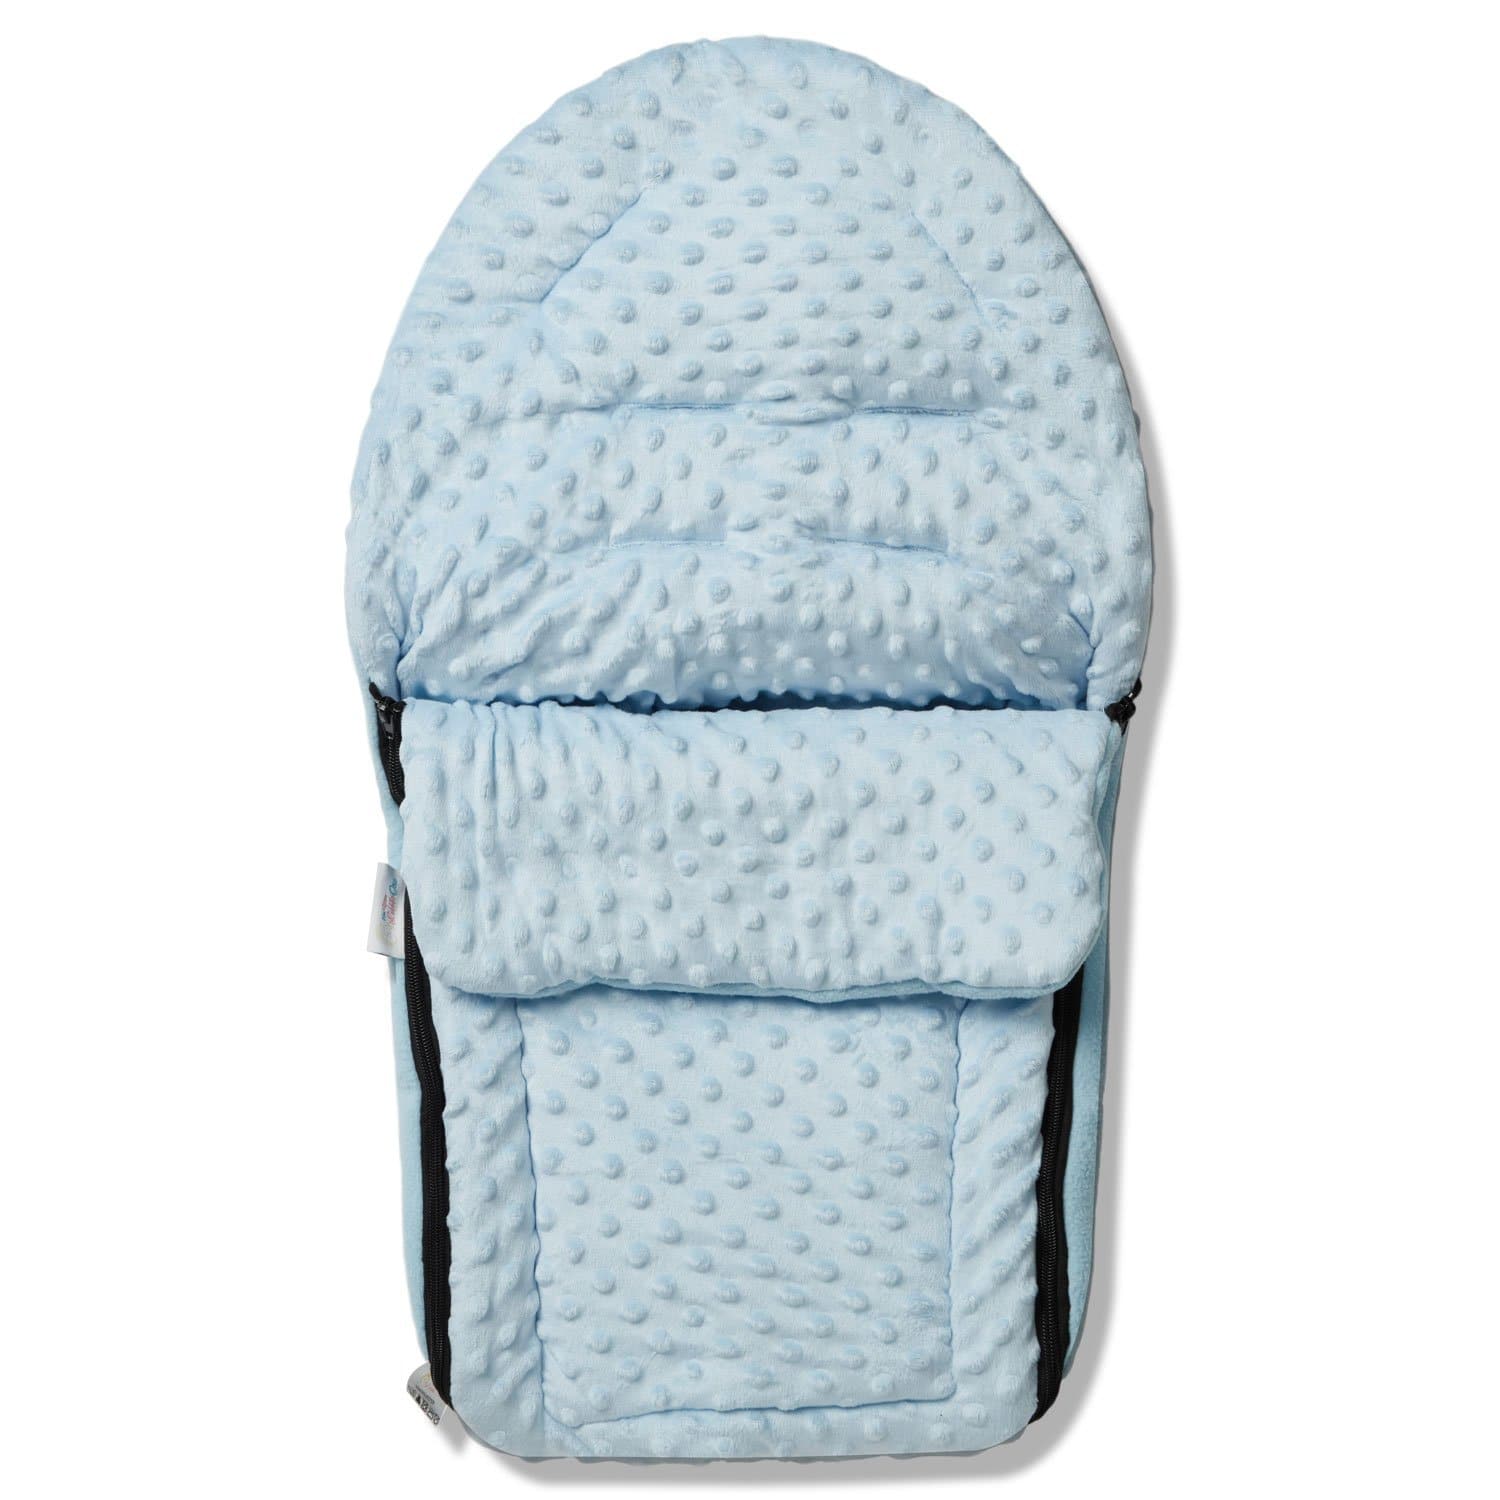 Dimple Car Seat Footmuff / Cosy Toes Compatible with Infababy - Blue / Fits All Models | For Your Little One